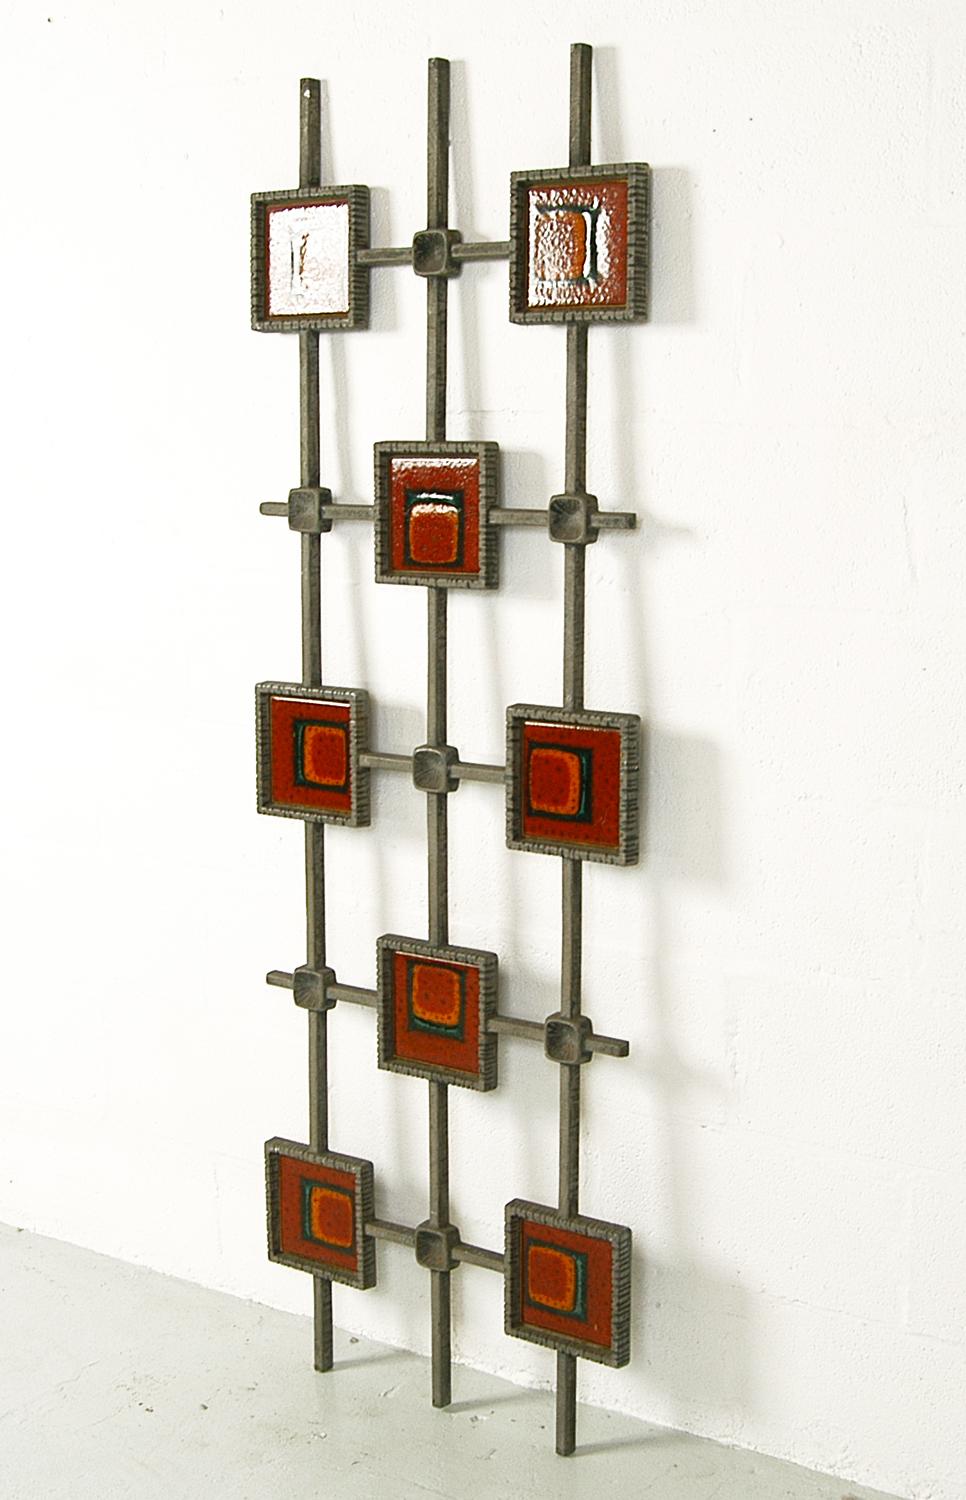 Highly decorative 1960s Brutalist door security grille, made from cast aluminium with wonderful ceramic tile inserts. This vintage architectural piece could easily be mounted on the wall as a piece of art or used as a decorative partition.